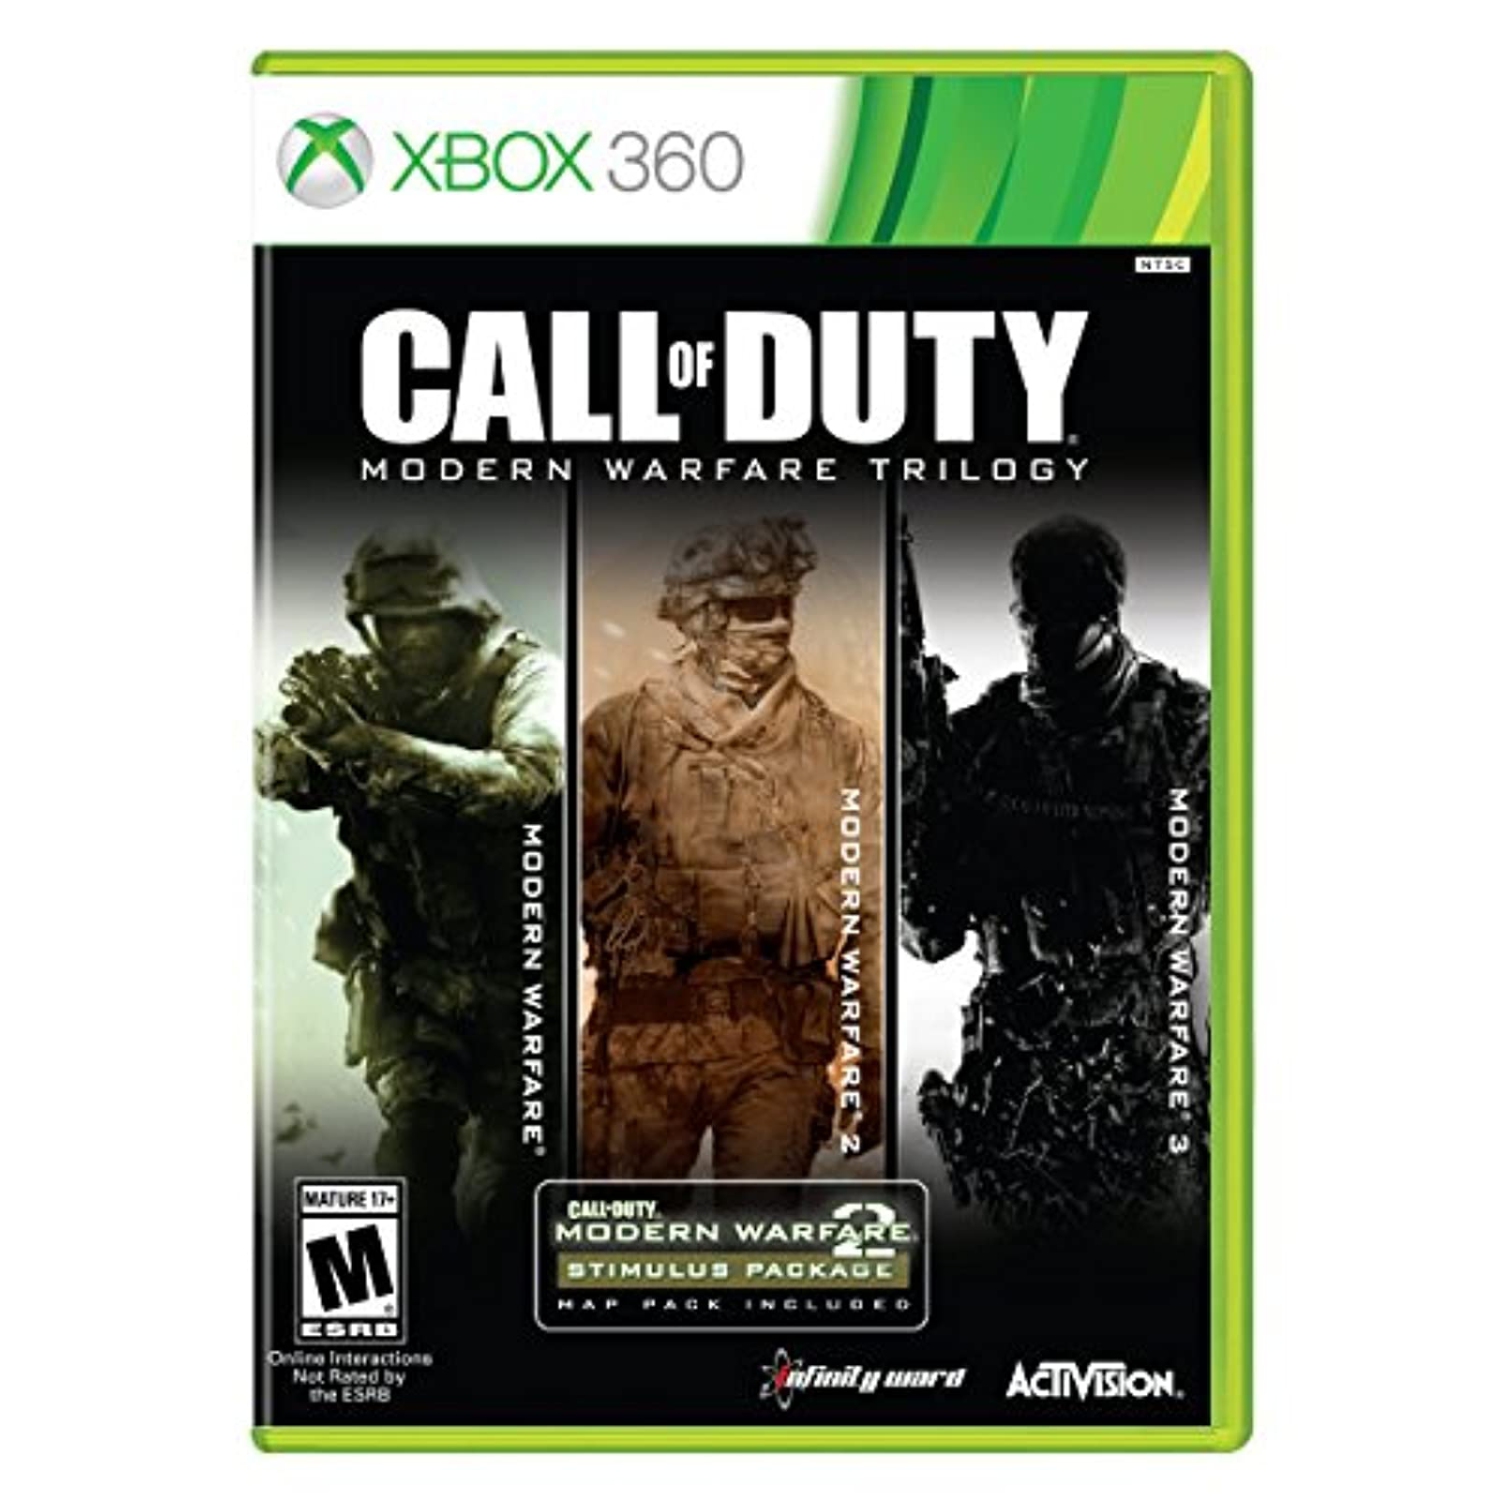 Previously Played - Call of Duty Modern Warfare Collection Trilogy, Activision, Xbox 360